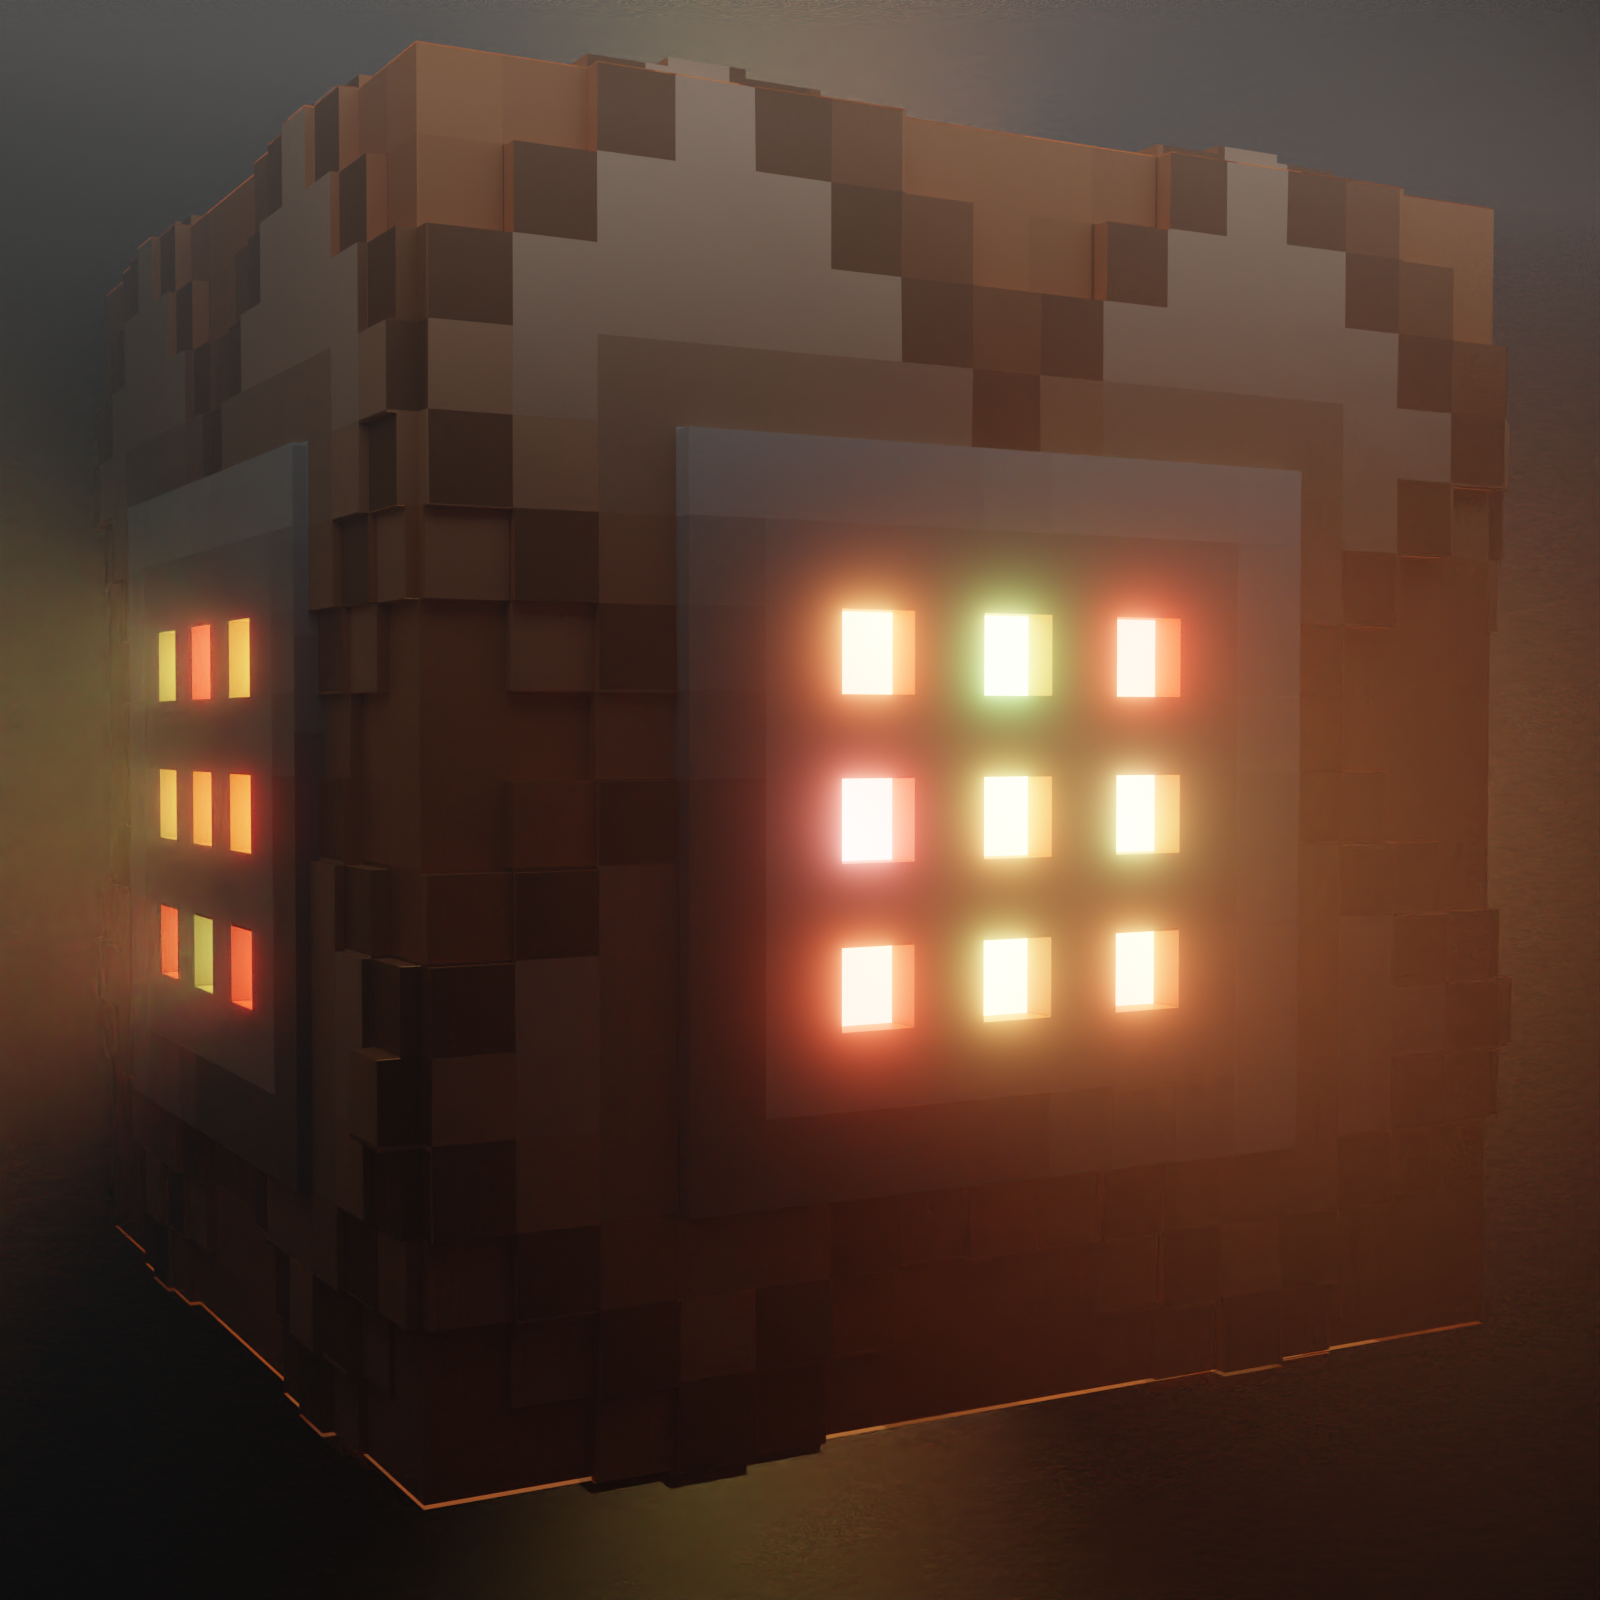 Tried making a cool command block in blender. How did I do?